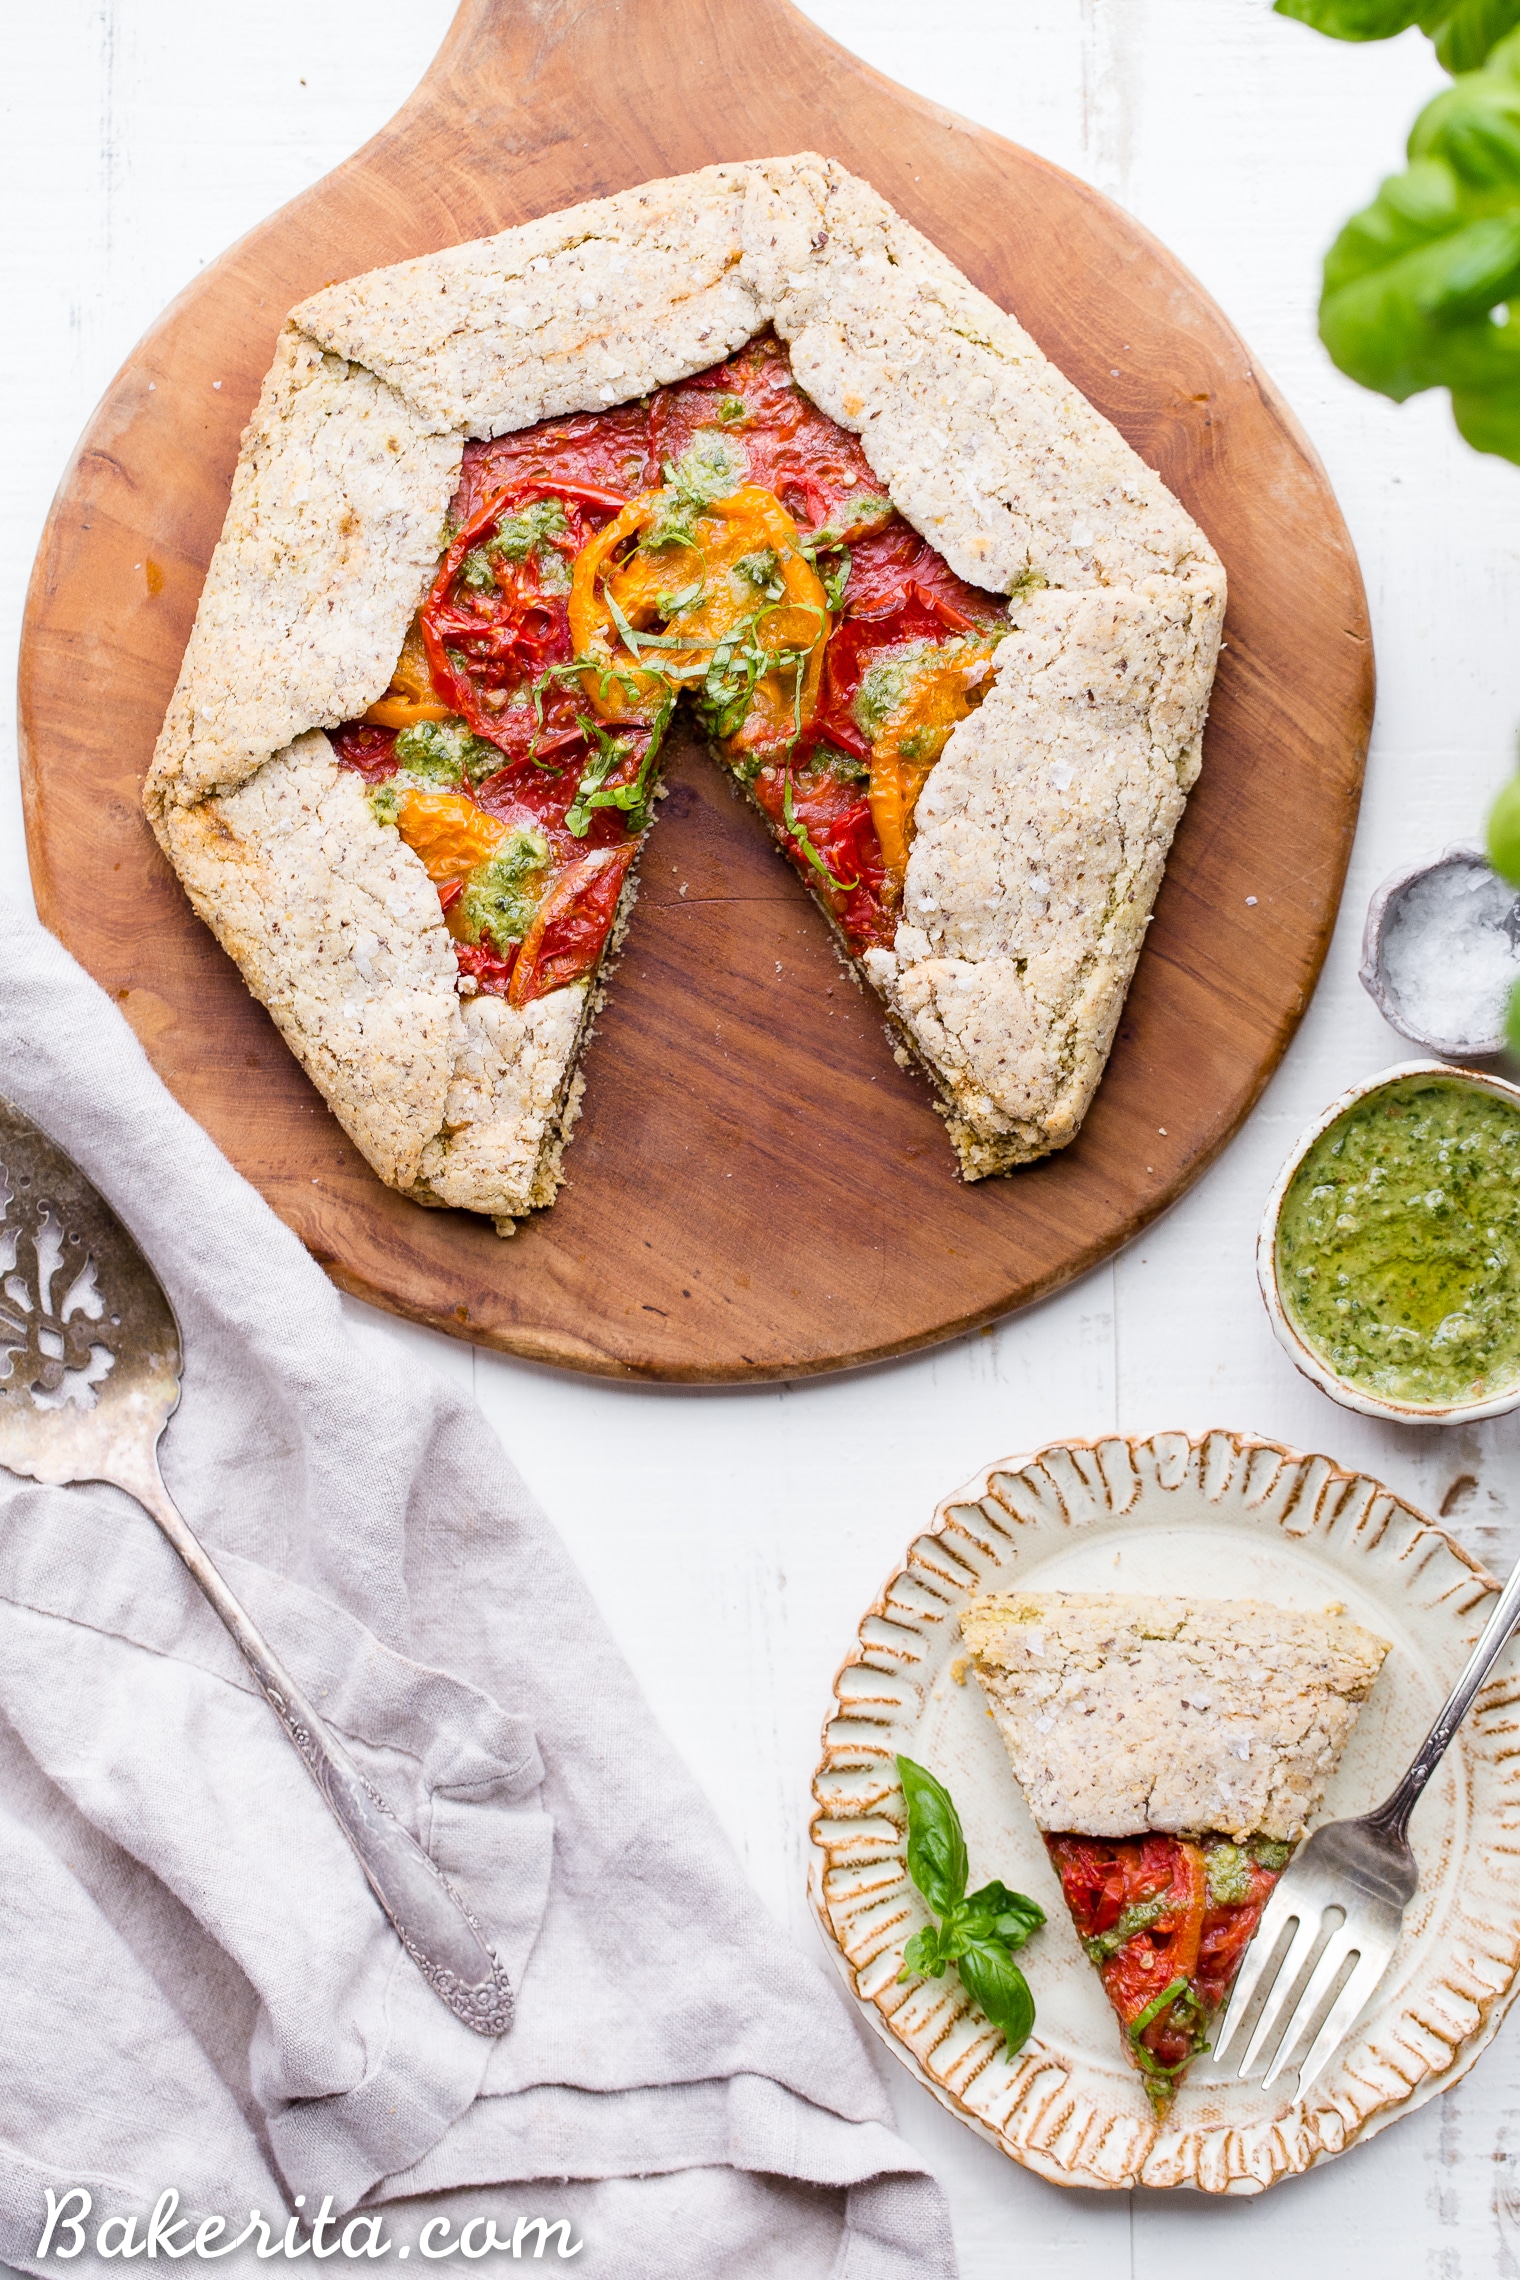 This Pesto + Heirloom Tomato Galette has an incredibly flaky, savory crust filled with homemade pesto and thick slices of heirloom tomatoes. Served warm, it's a truly delicious appetizer or meal that you'd never guess is gluten-free, paleo, and vegan.